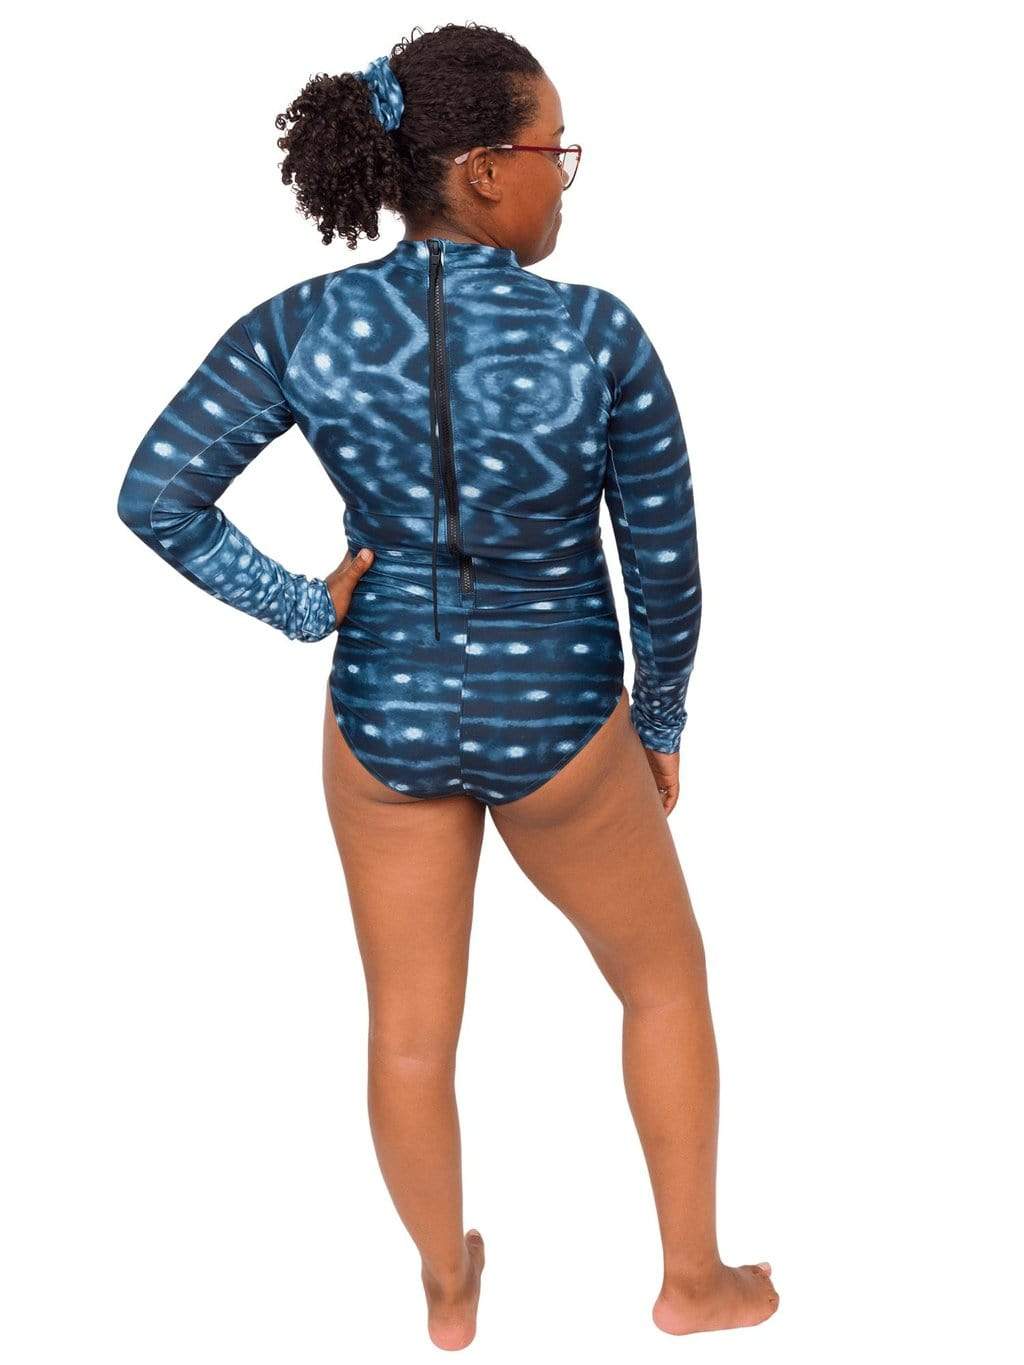 Model: Amani is the CFO of Minorities in Shark Sciences and a shark scientist. She is 5&#39;3&quot;, 160 lbs, 36C and is wearing a M.